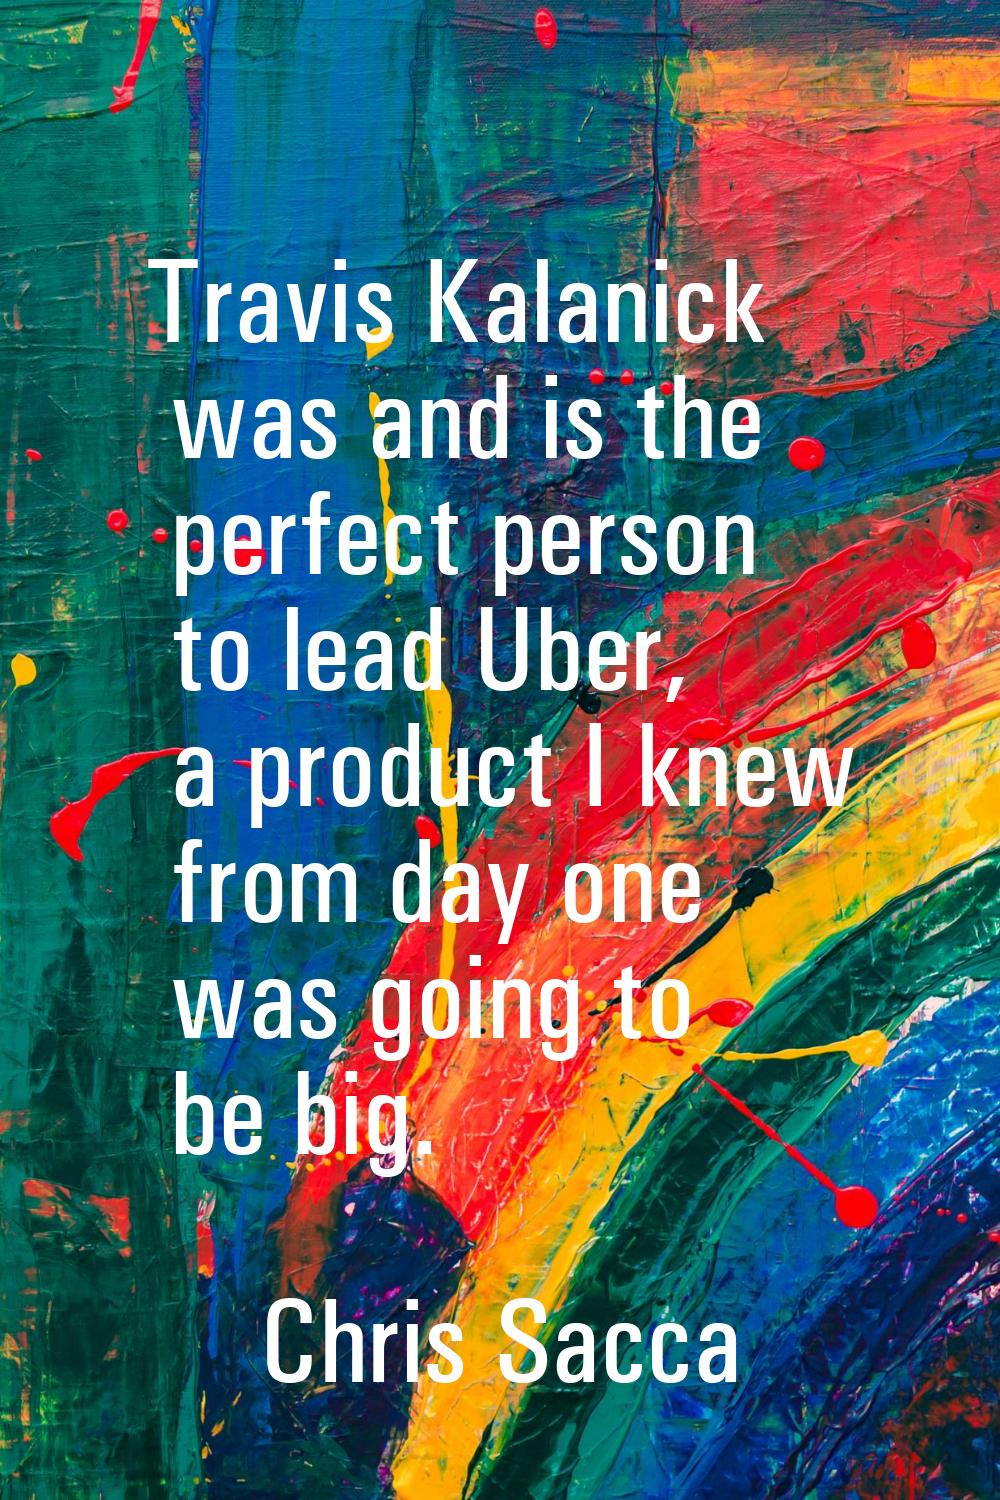 Travis Kalanick was and is the perfect person to lead Uber, a product I knew from day one was going